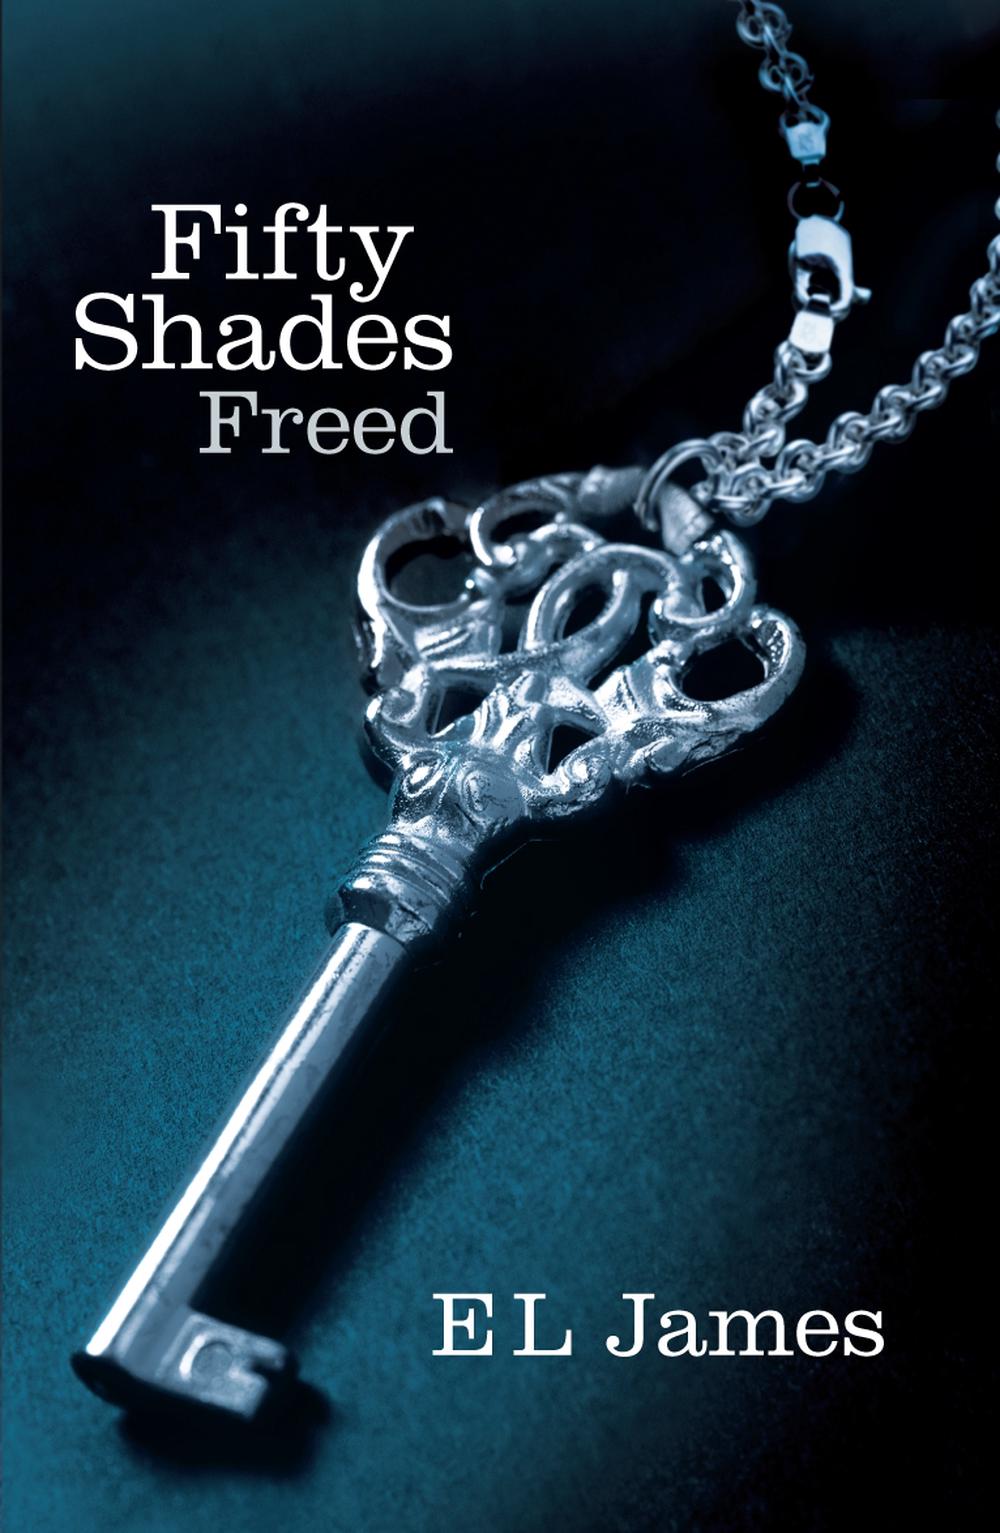 Fifty Shades Freed by E L James, 9780099579946 | Buy ...